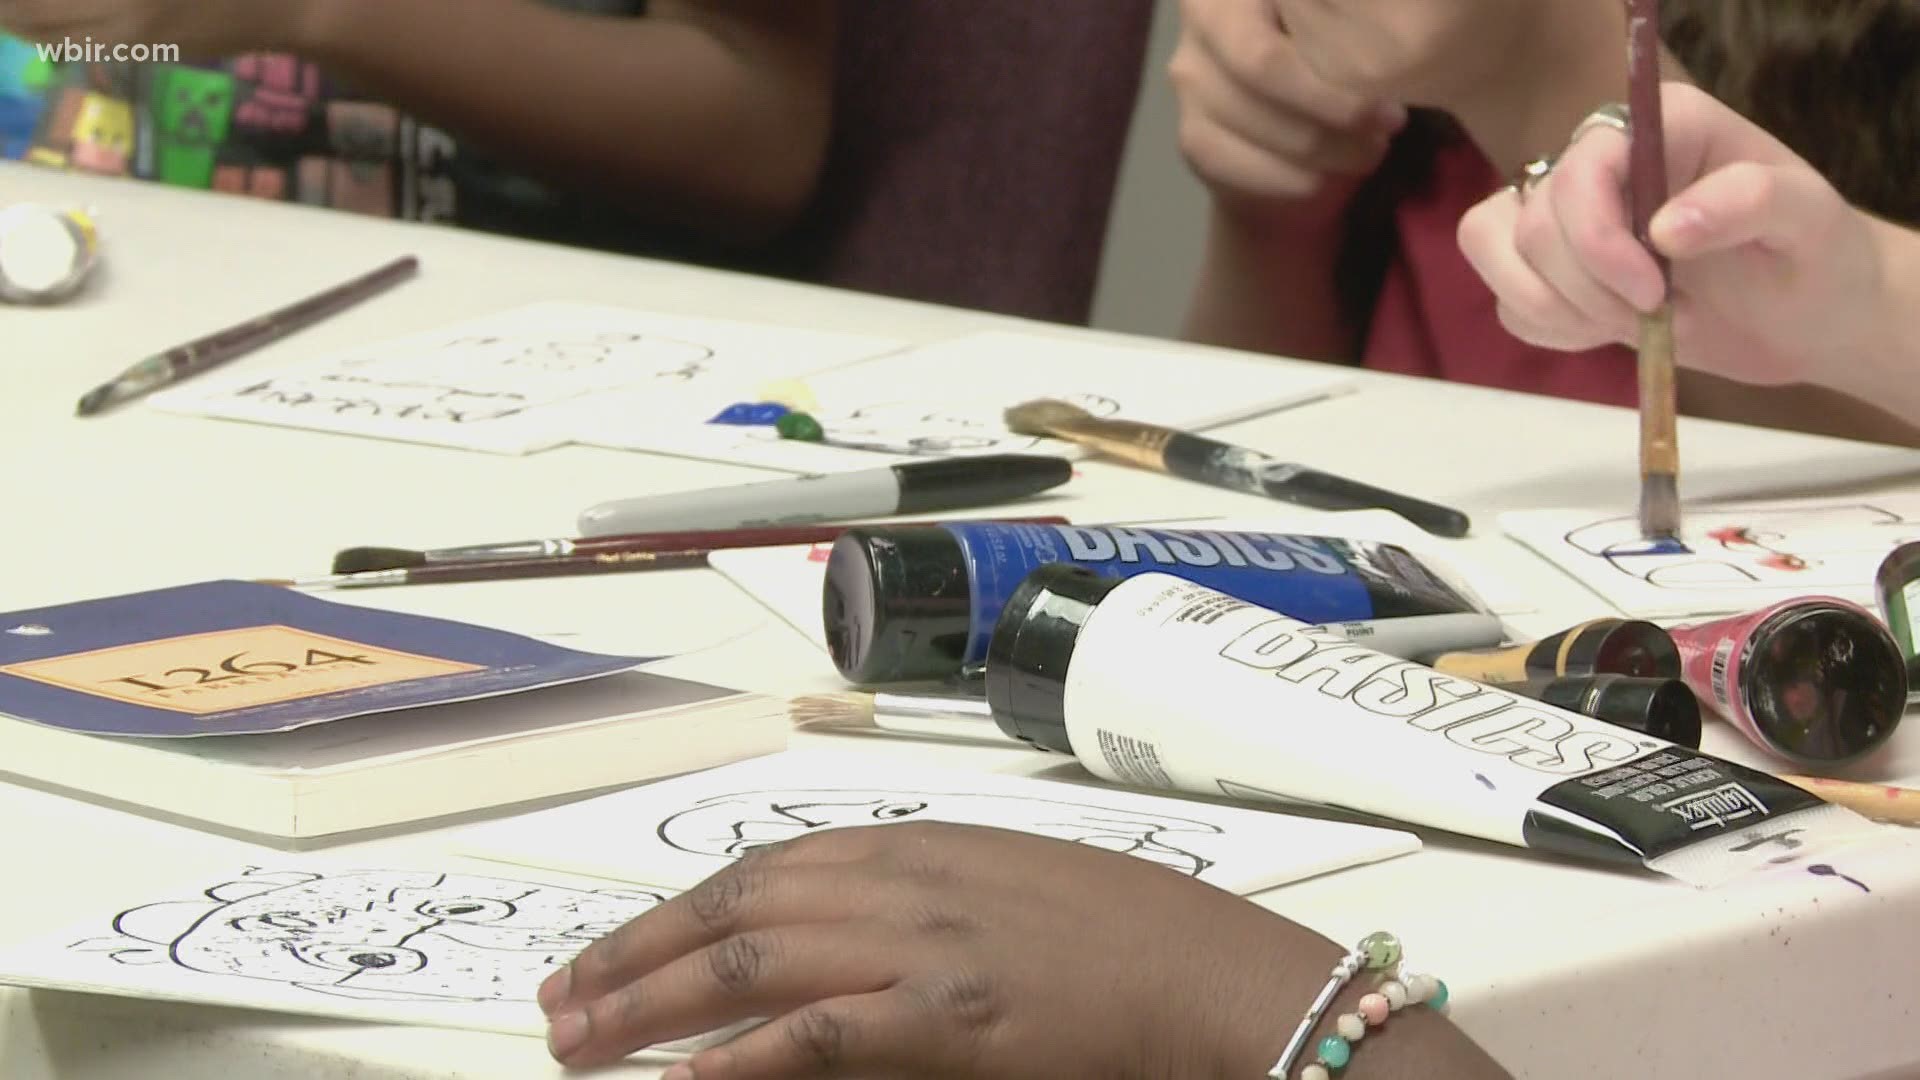 Kids got hands-on with clay sculpting, painting, drawing and photography.